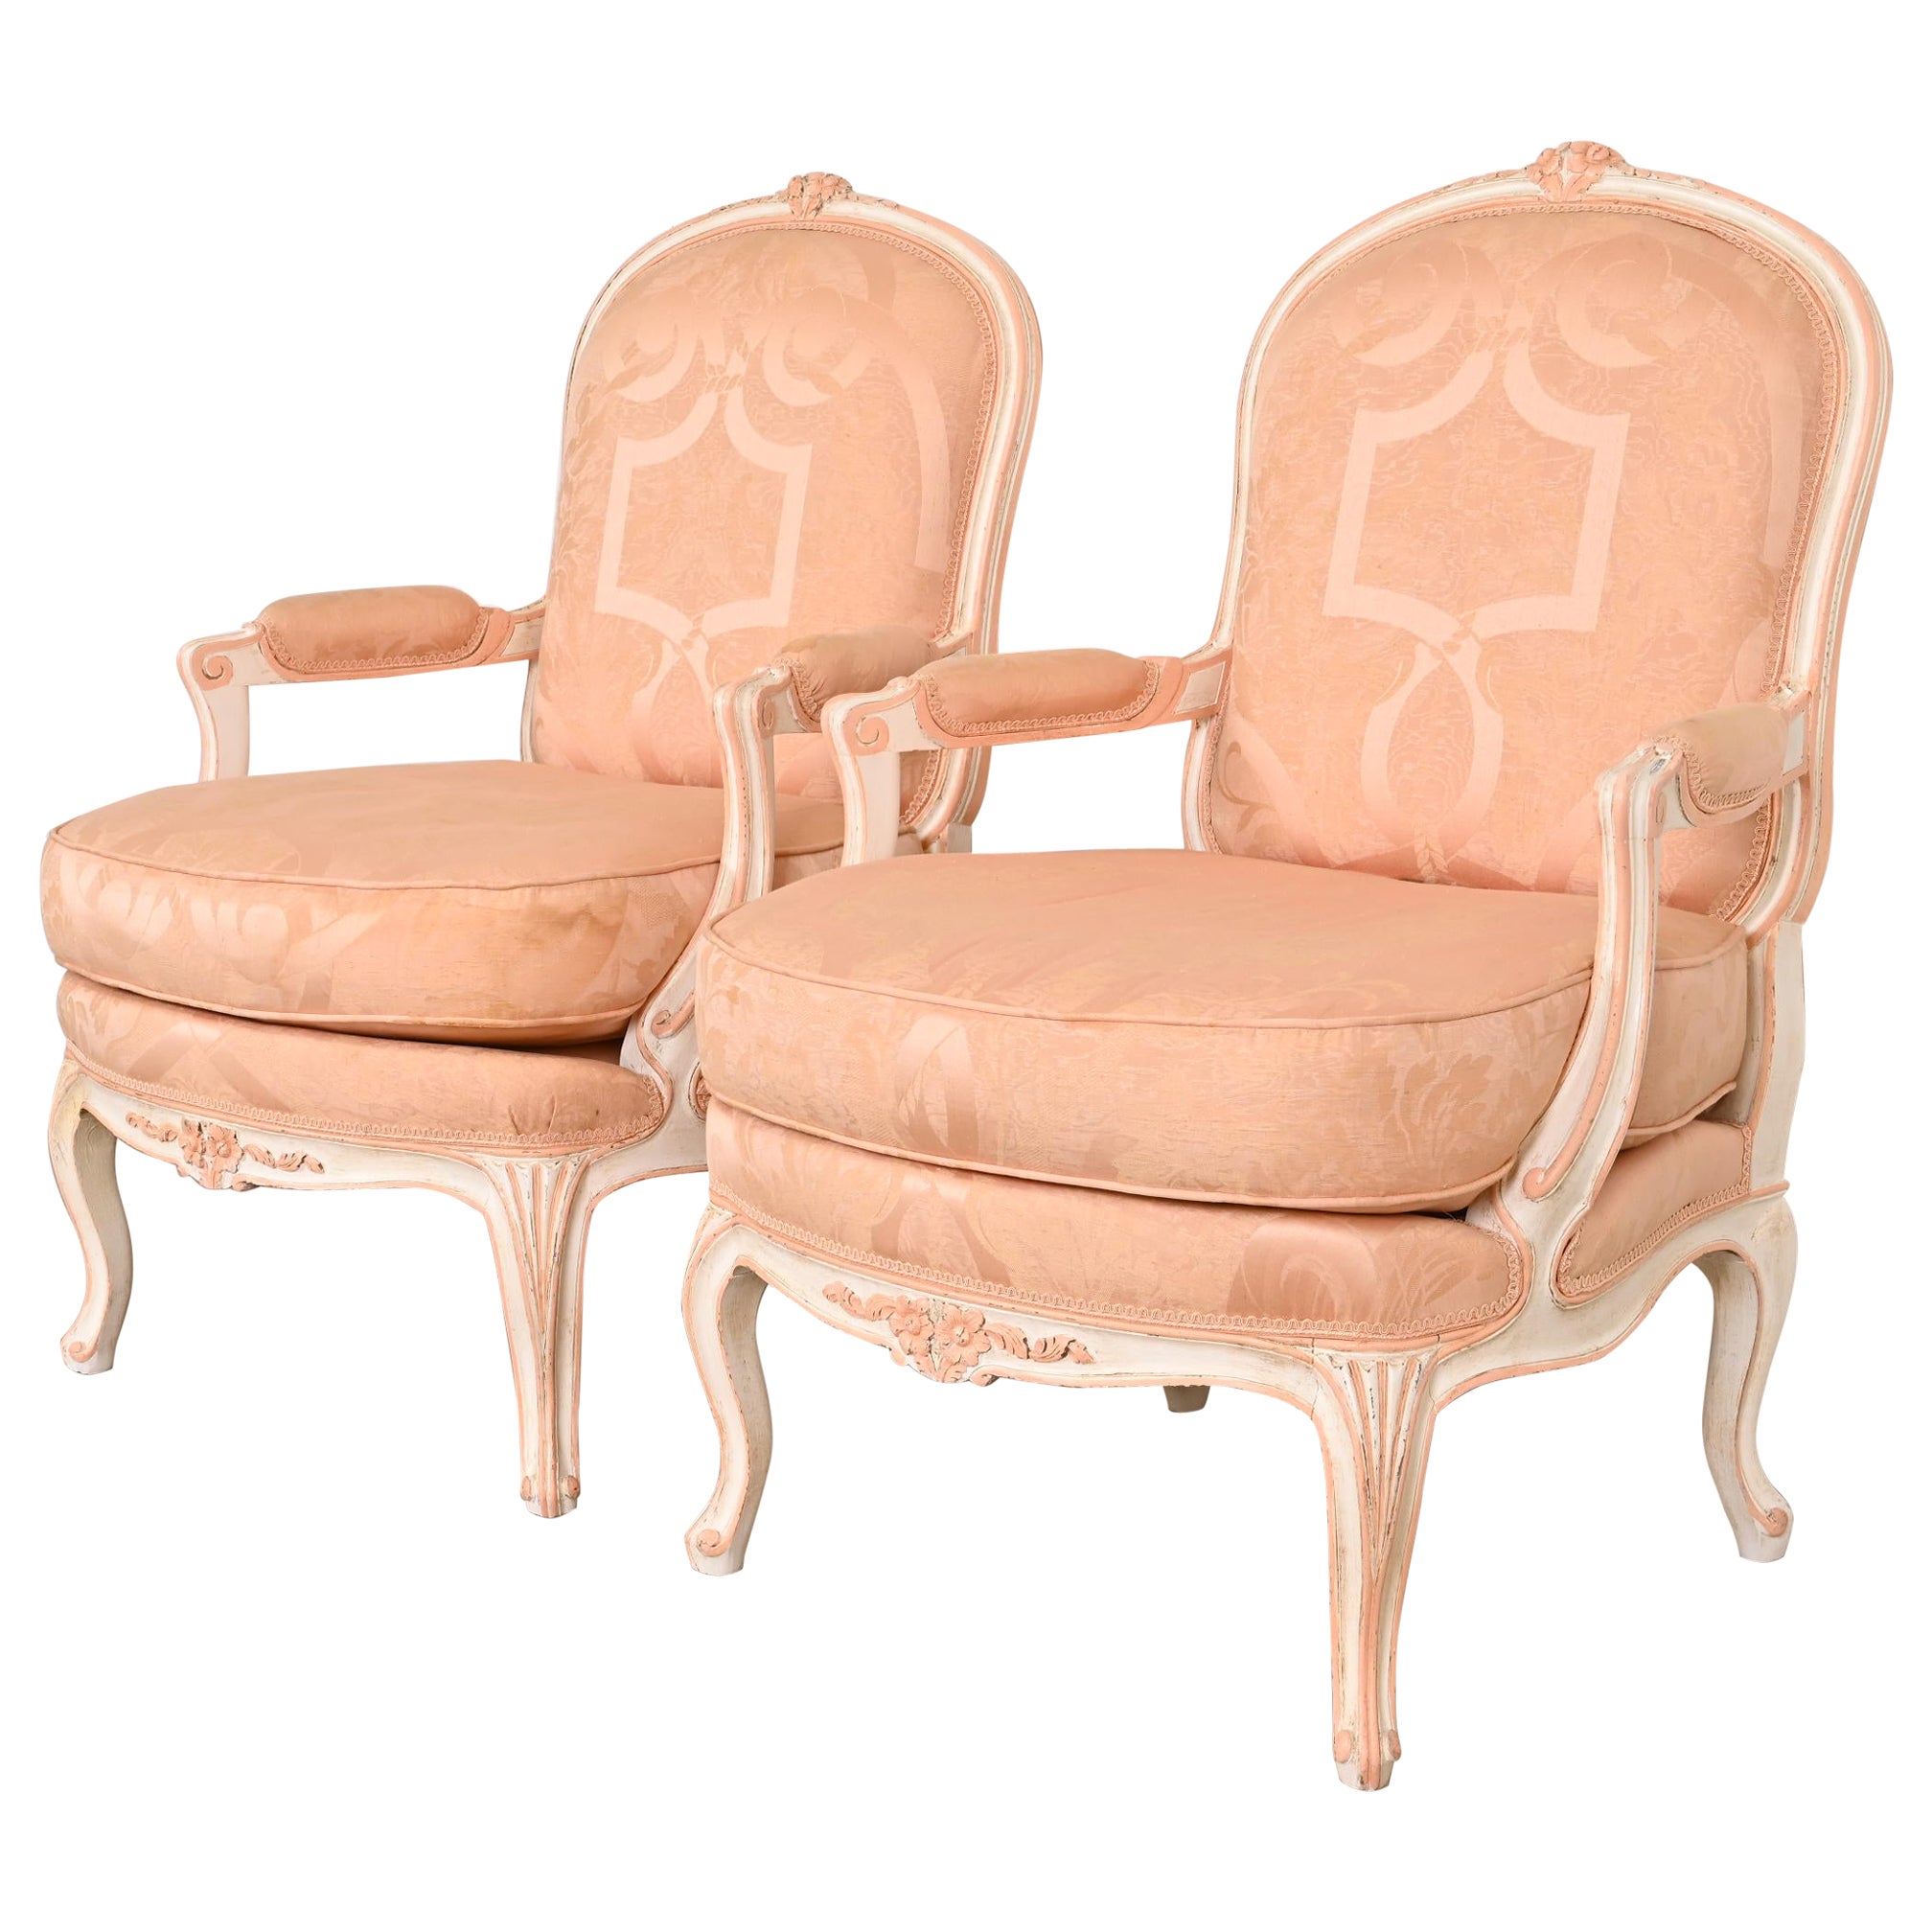 French Provincial Louis XV Carved Painted Walnut Fauteuils, Pair For Sale